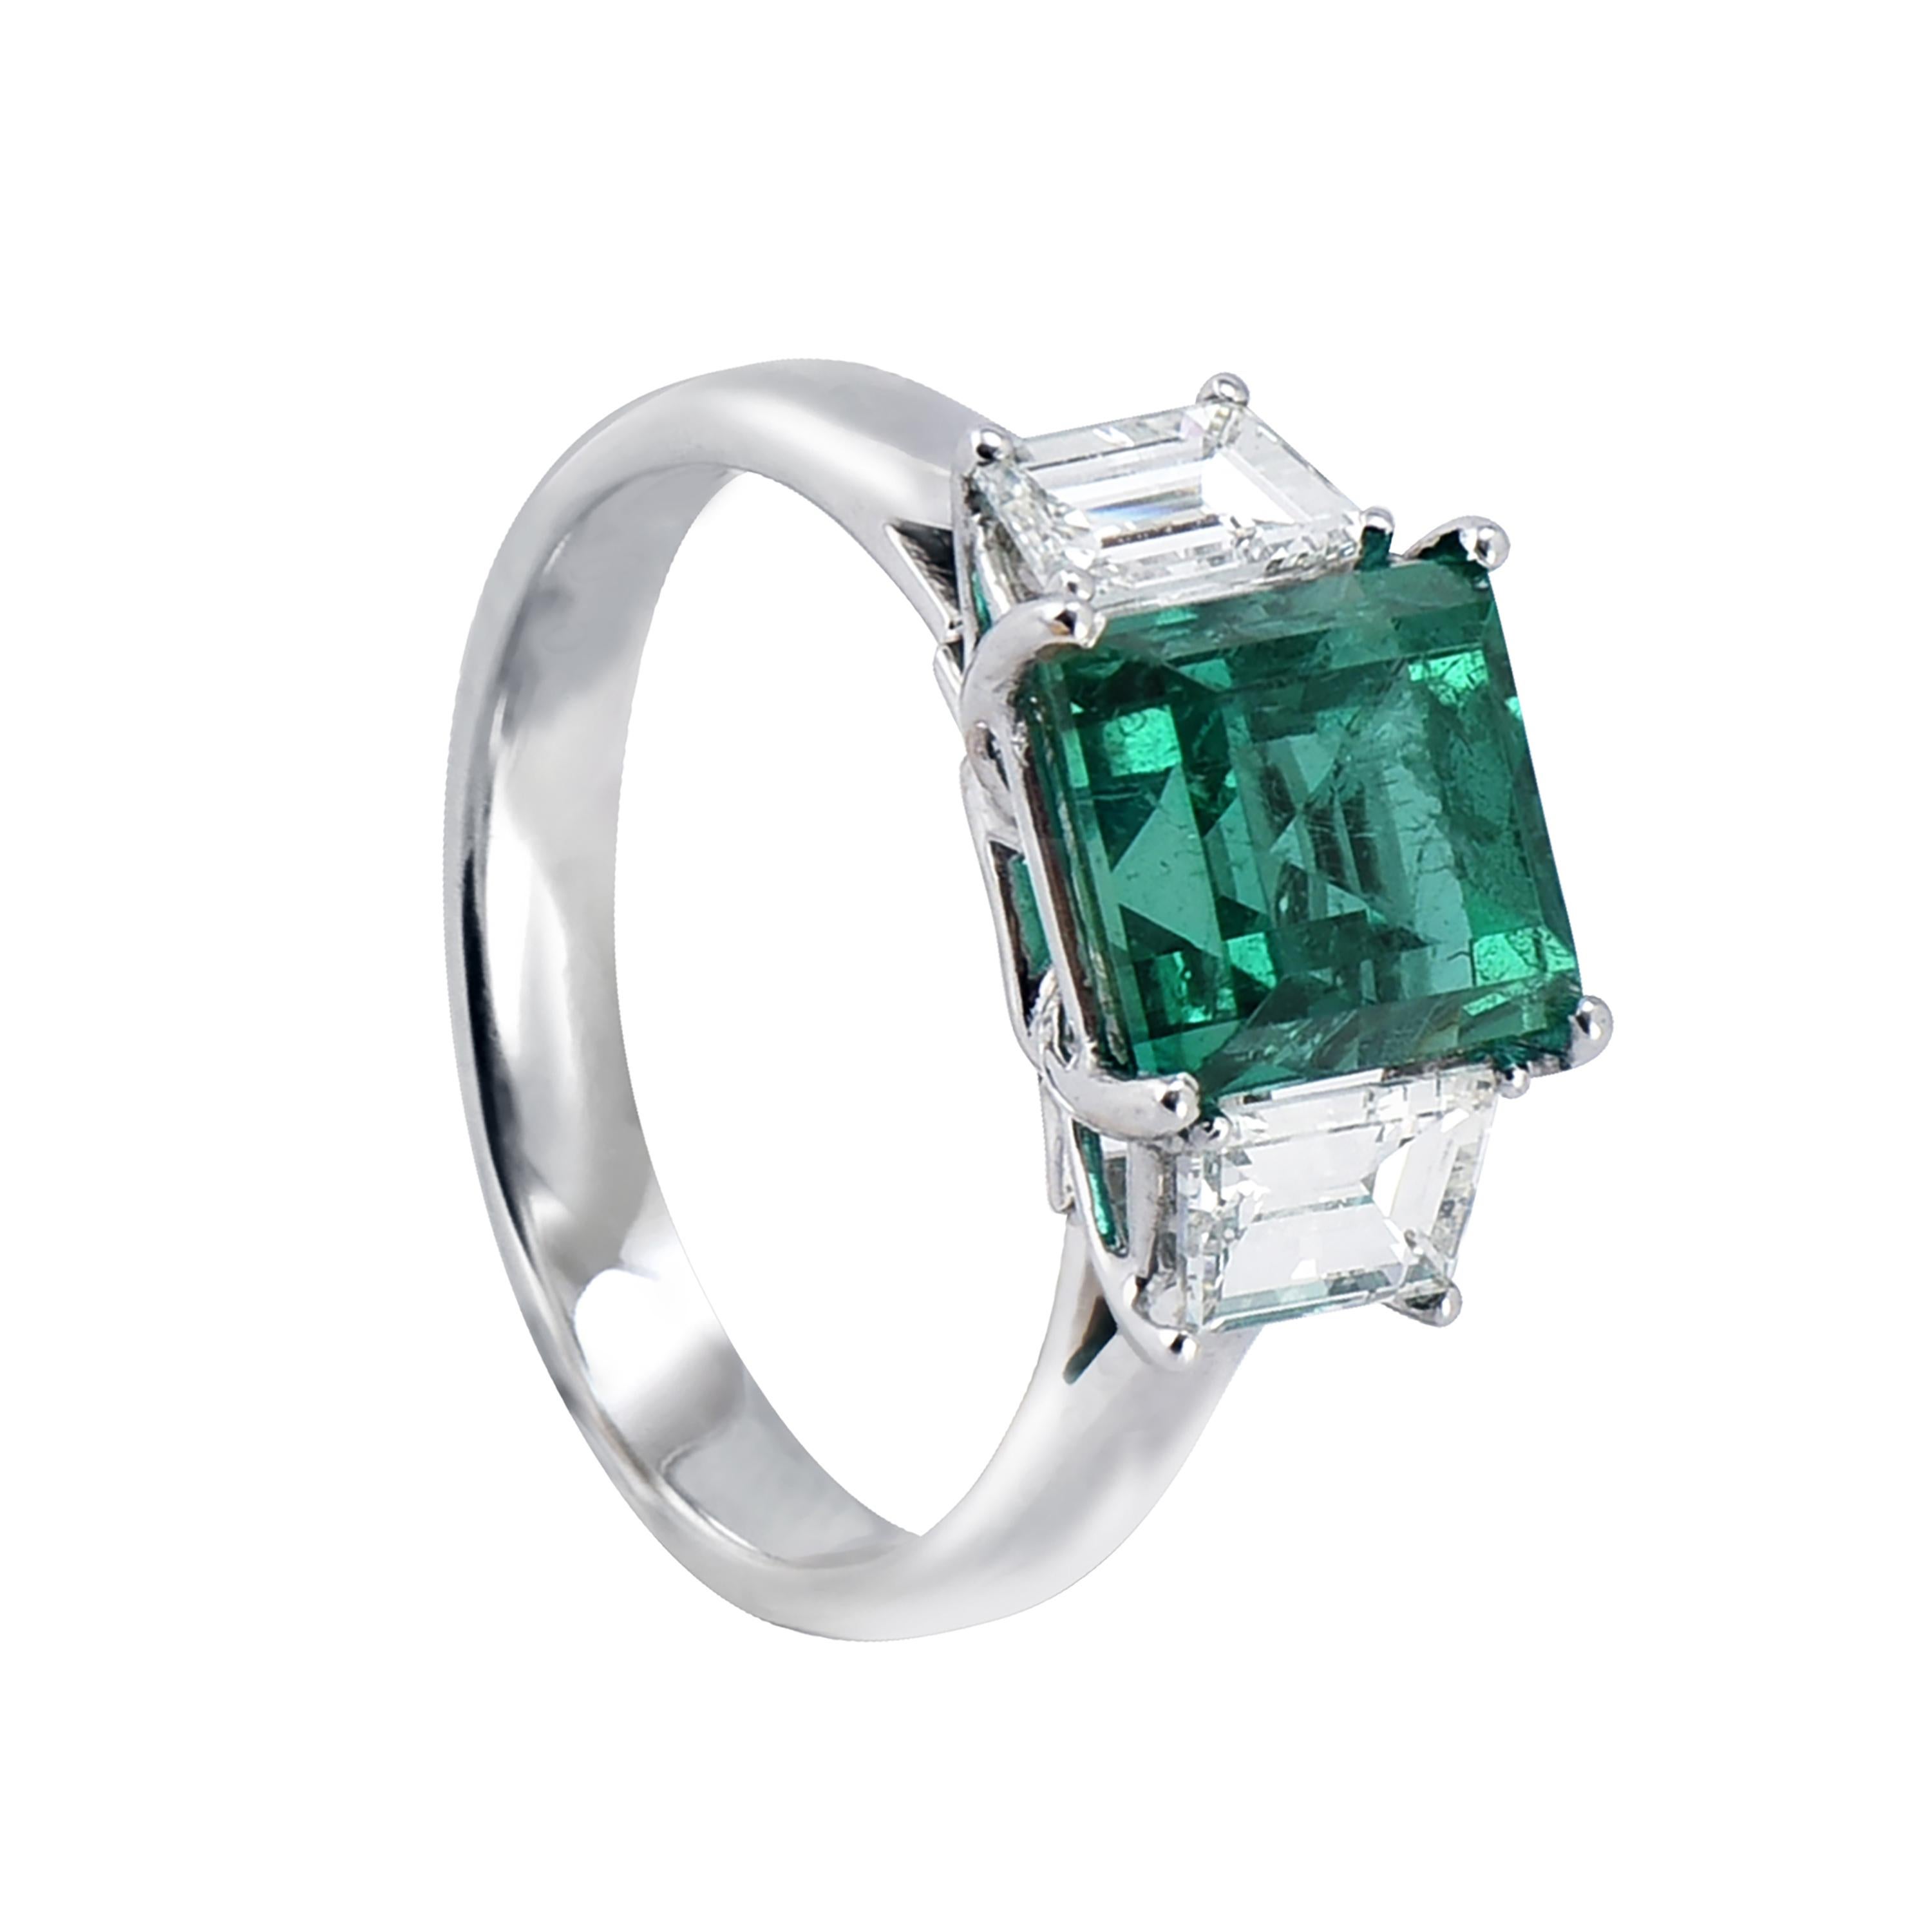 18 karat white gold emerald ring from the Princess collection of Laviere. The ring is set with a GIA certified 2.89 carats emerald and two white diamonds totaling 0.96 carats.
Gold Weight 4.25 grams. Diamond Clarity VS-SI. Diamond Colour G-H.
Ring